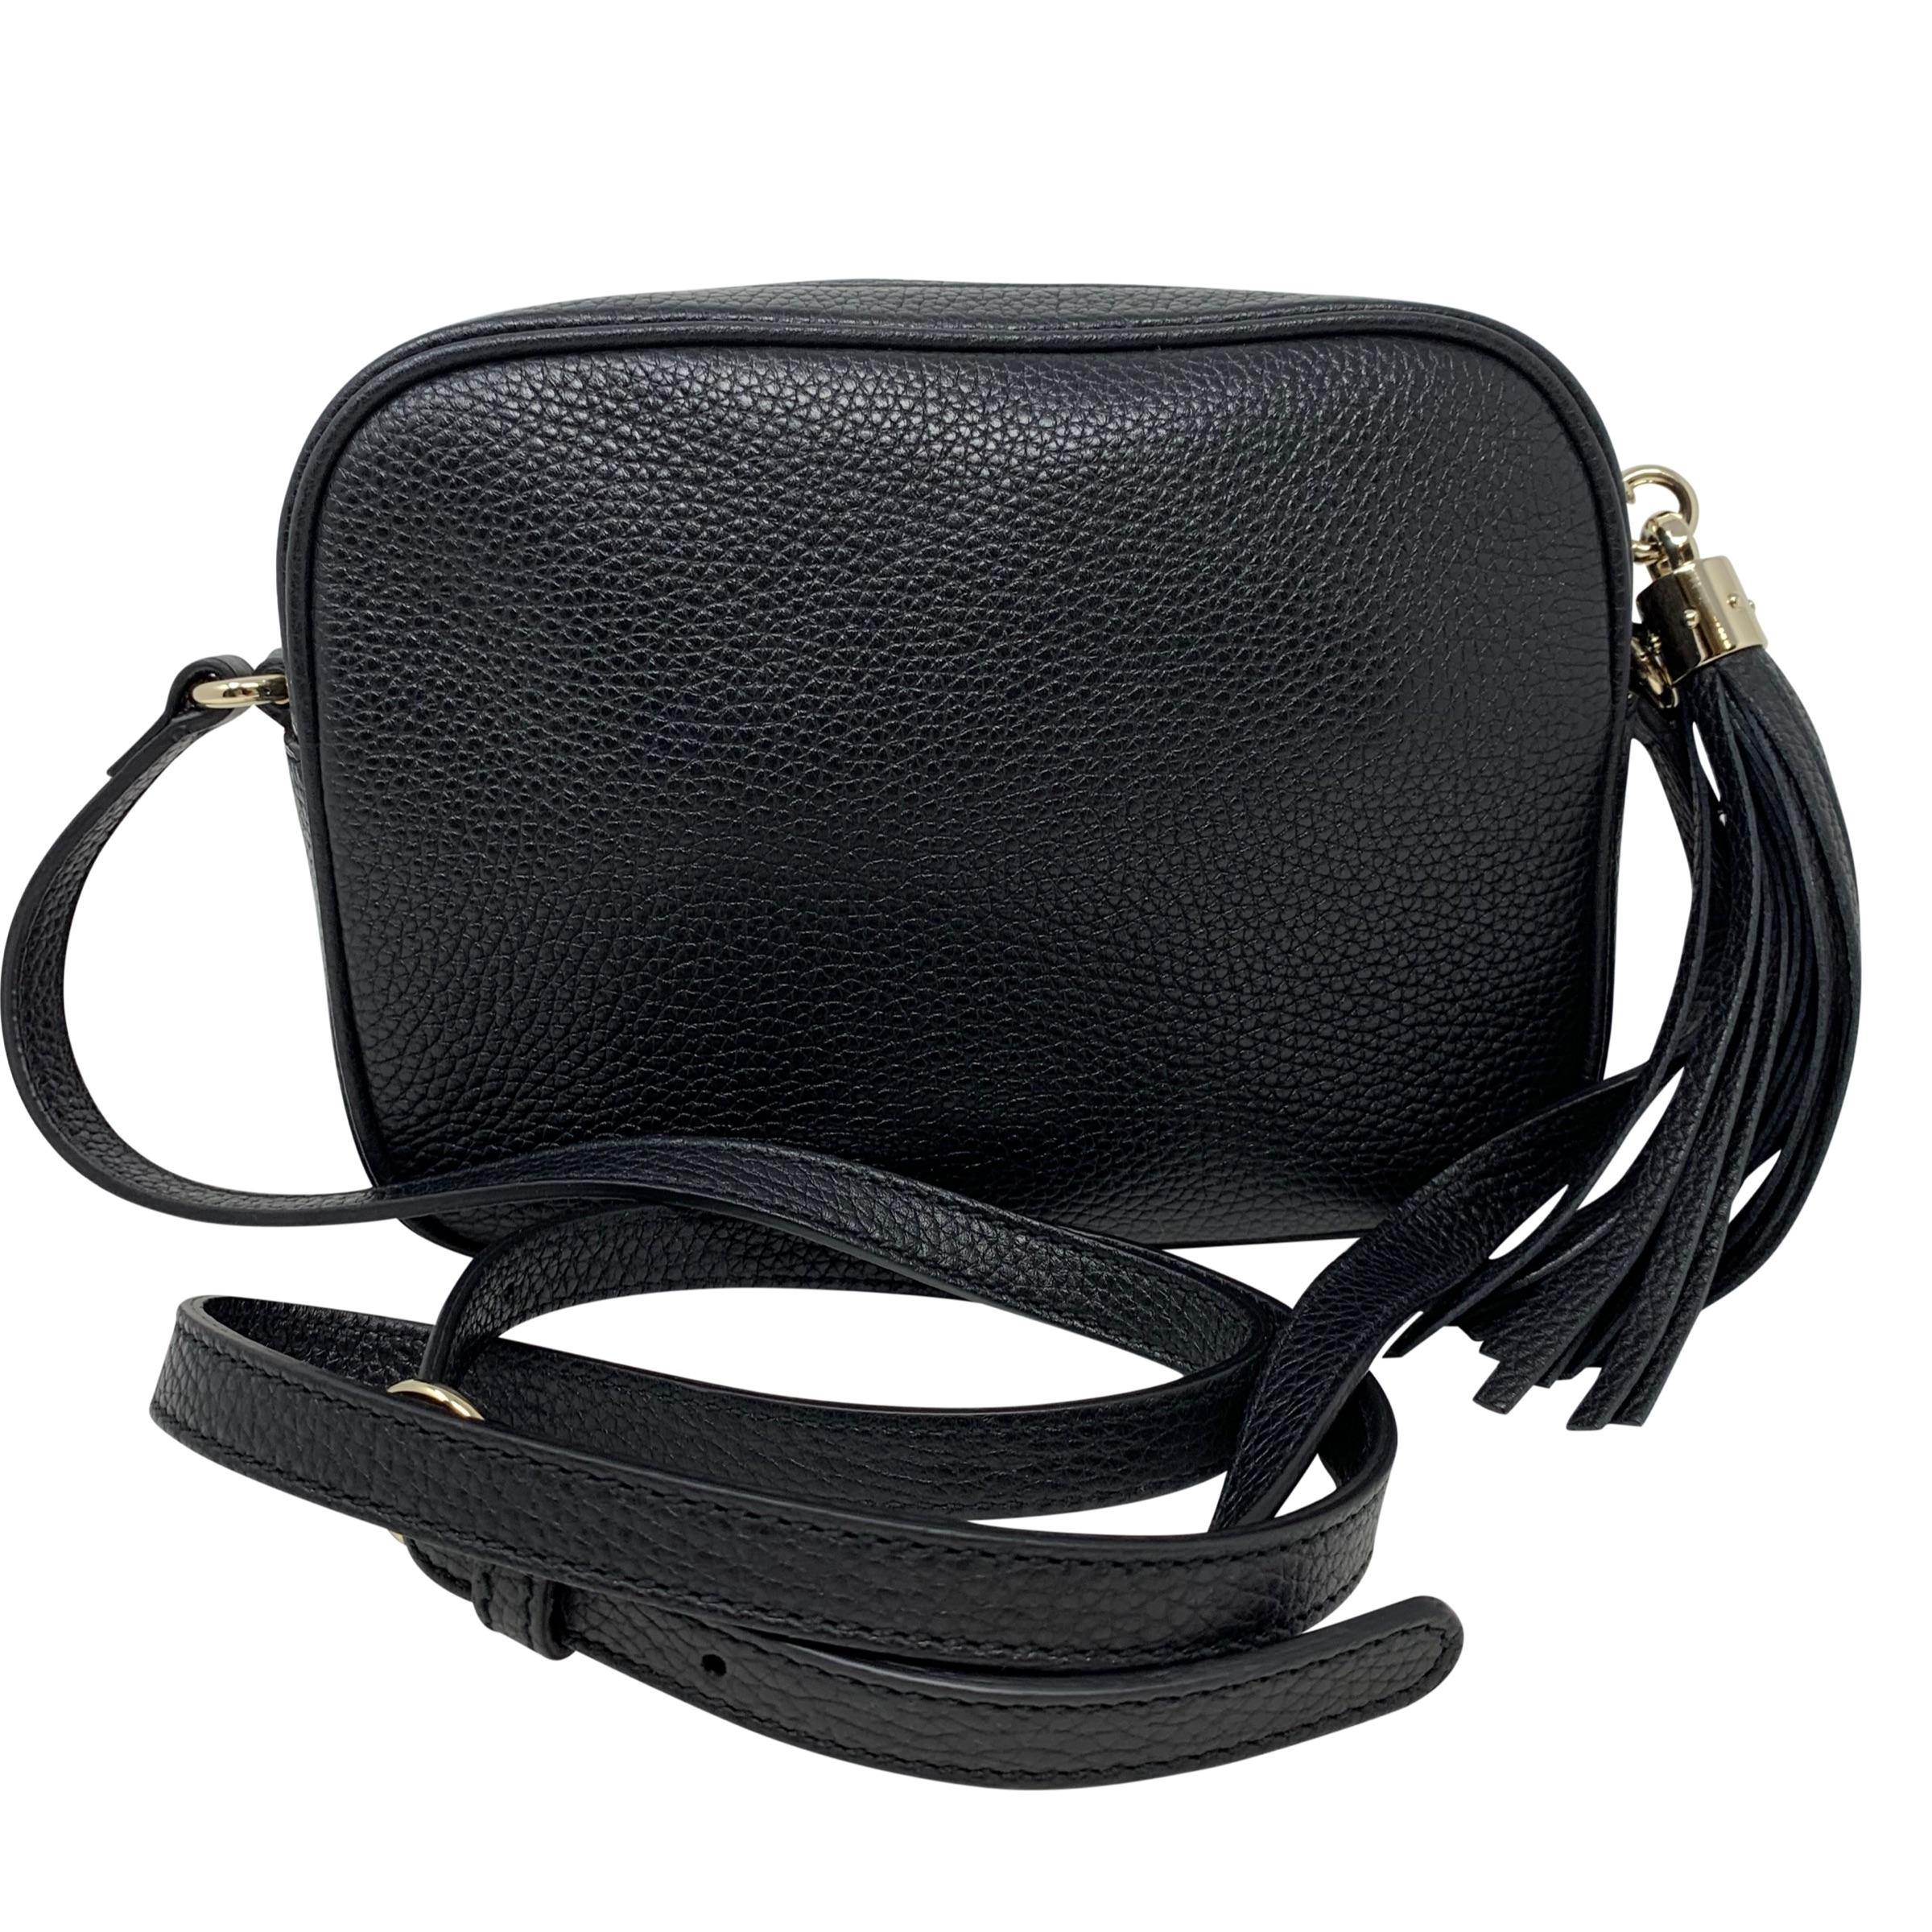 NEW Gucci Black Small Soho Disco Leather Crossbody Bag For Sale 4